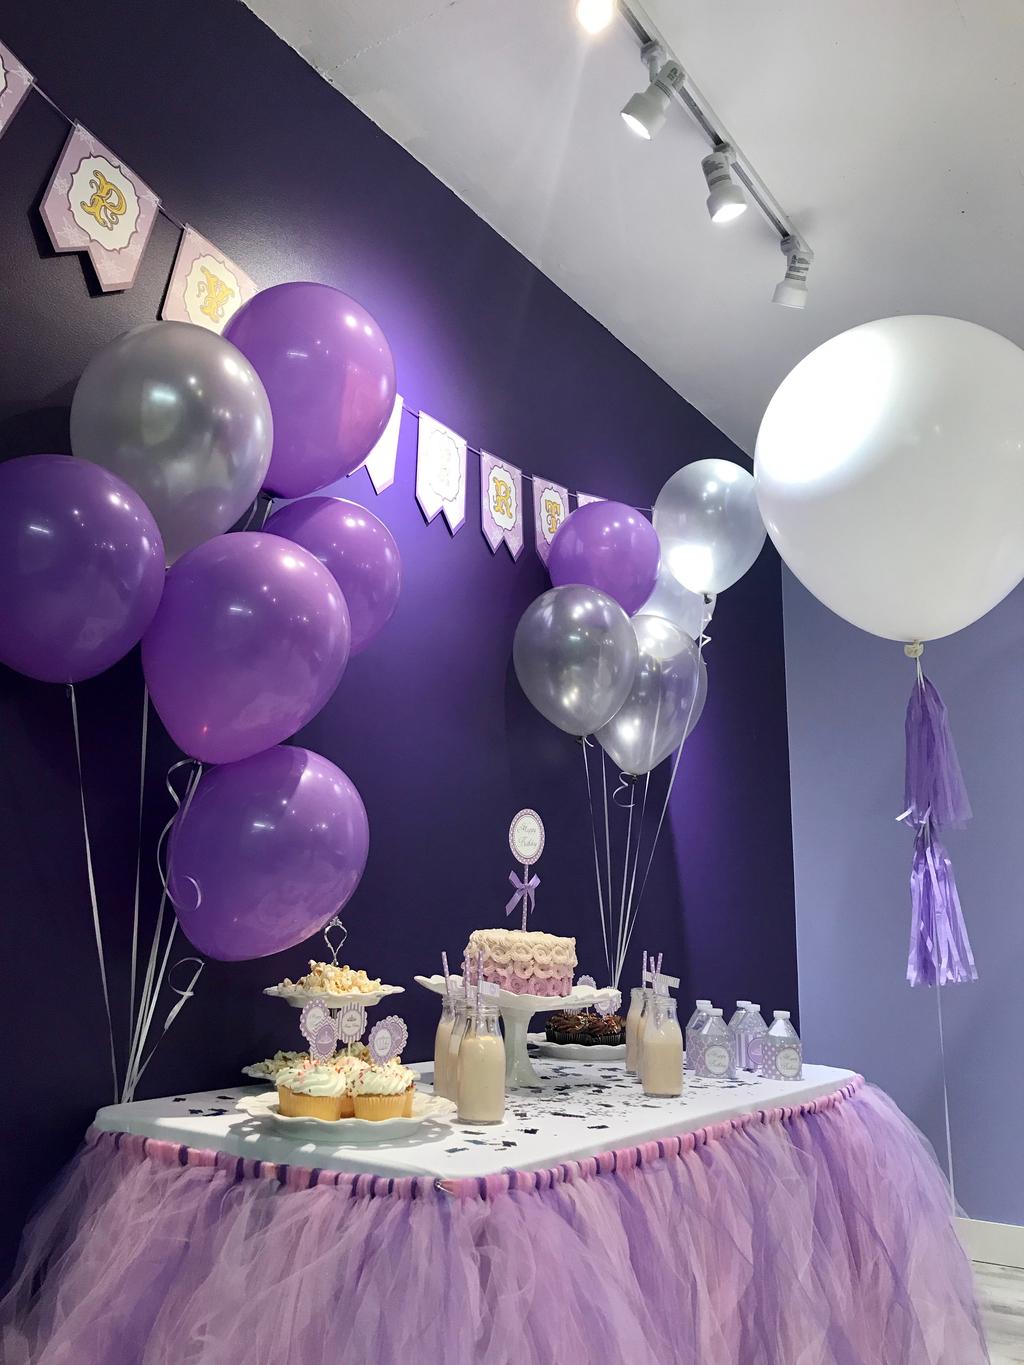 JUMPING BEANS PARTY 2017 THEME PARTY 1 $799 up to 15 children & 25 adults, additional person $12/each, under 12 months for free - 1 party assistant to help set up